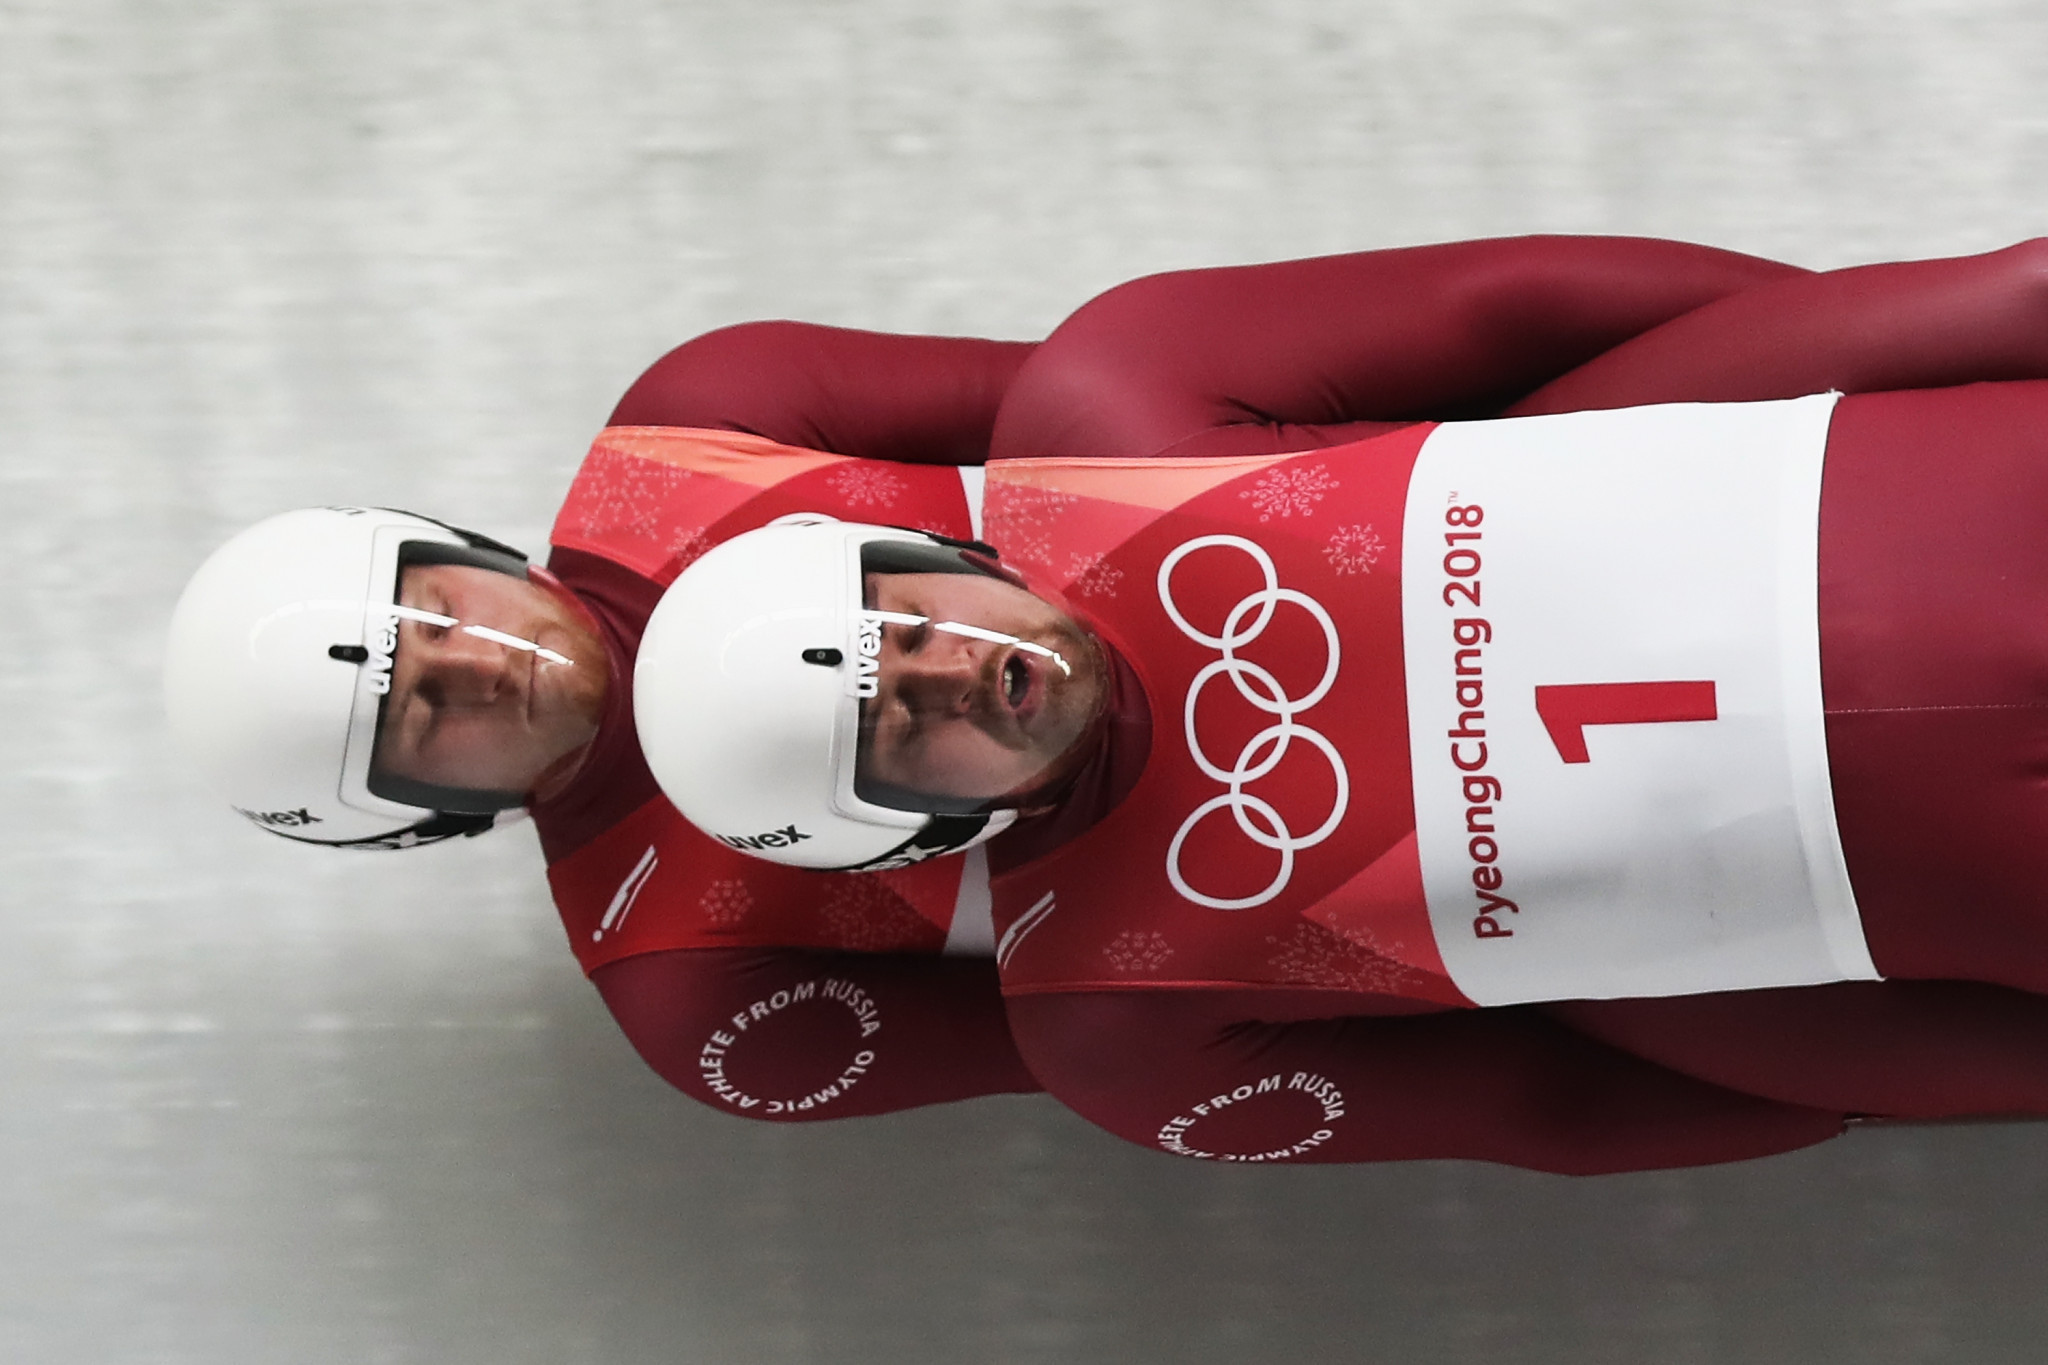 Vladislav Antonov, left, and Alexander Denisiev pulled out of the opening leg of the Luge World Cup after the former contracted coronavirus ©Getty Images